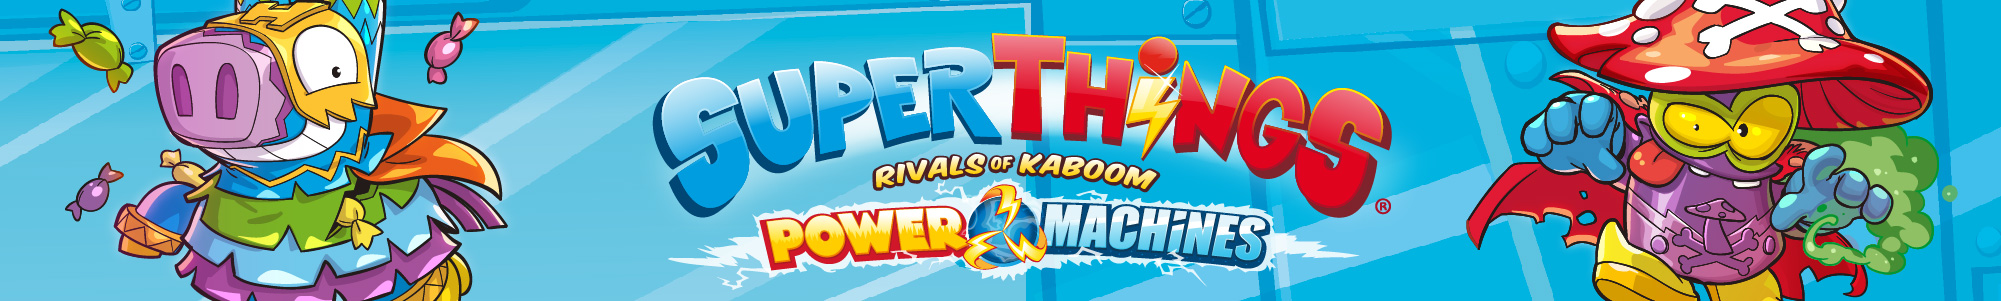 BANNERS The Entretainer_STH_POWERMACHINES_Brand page top banner.jpg